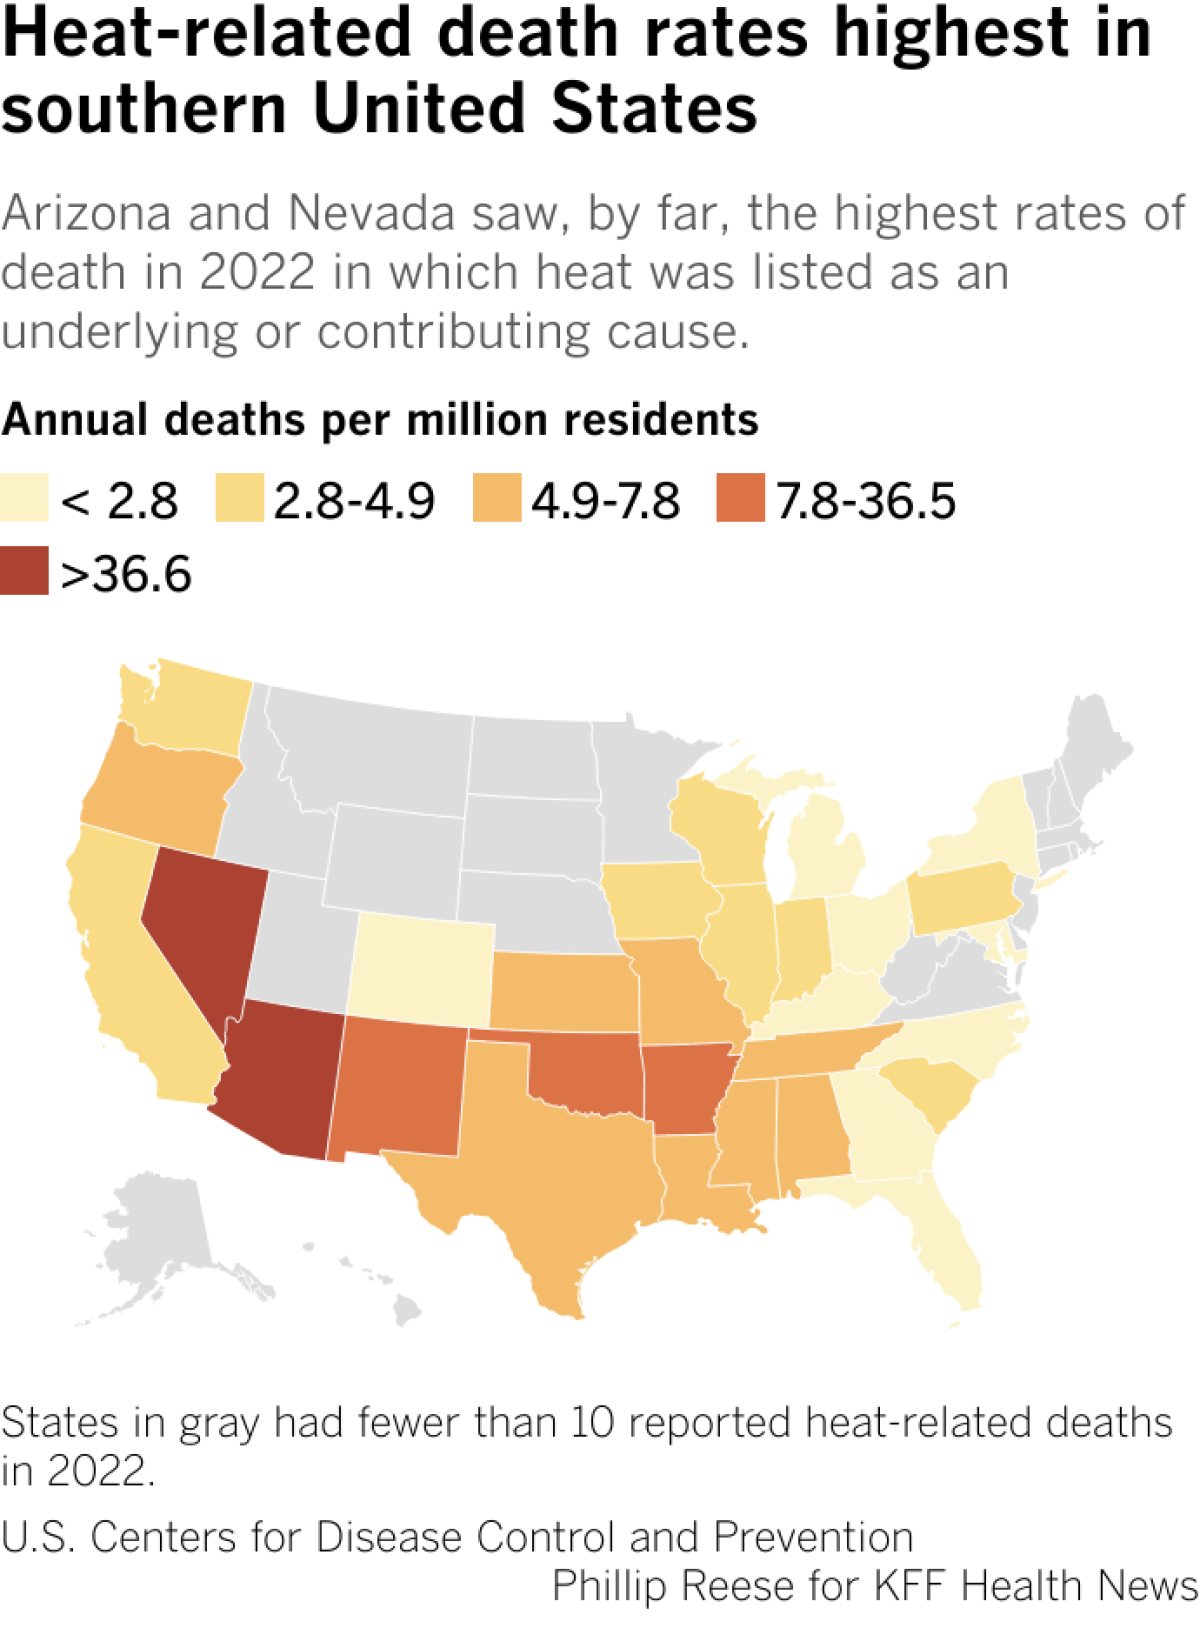 Map compares heat-related deaths by U.S. state. Nevada and Arizona have the highest death rates per million residents with 36.6 and 71.9, respectively.